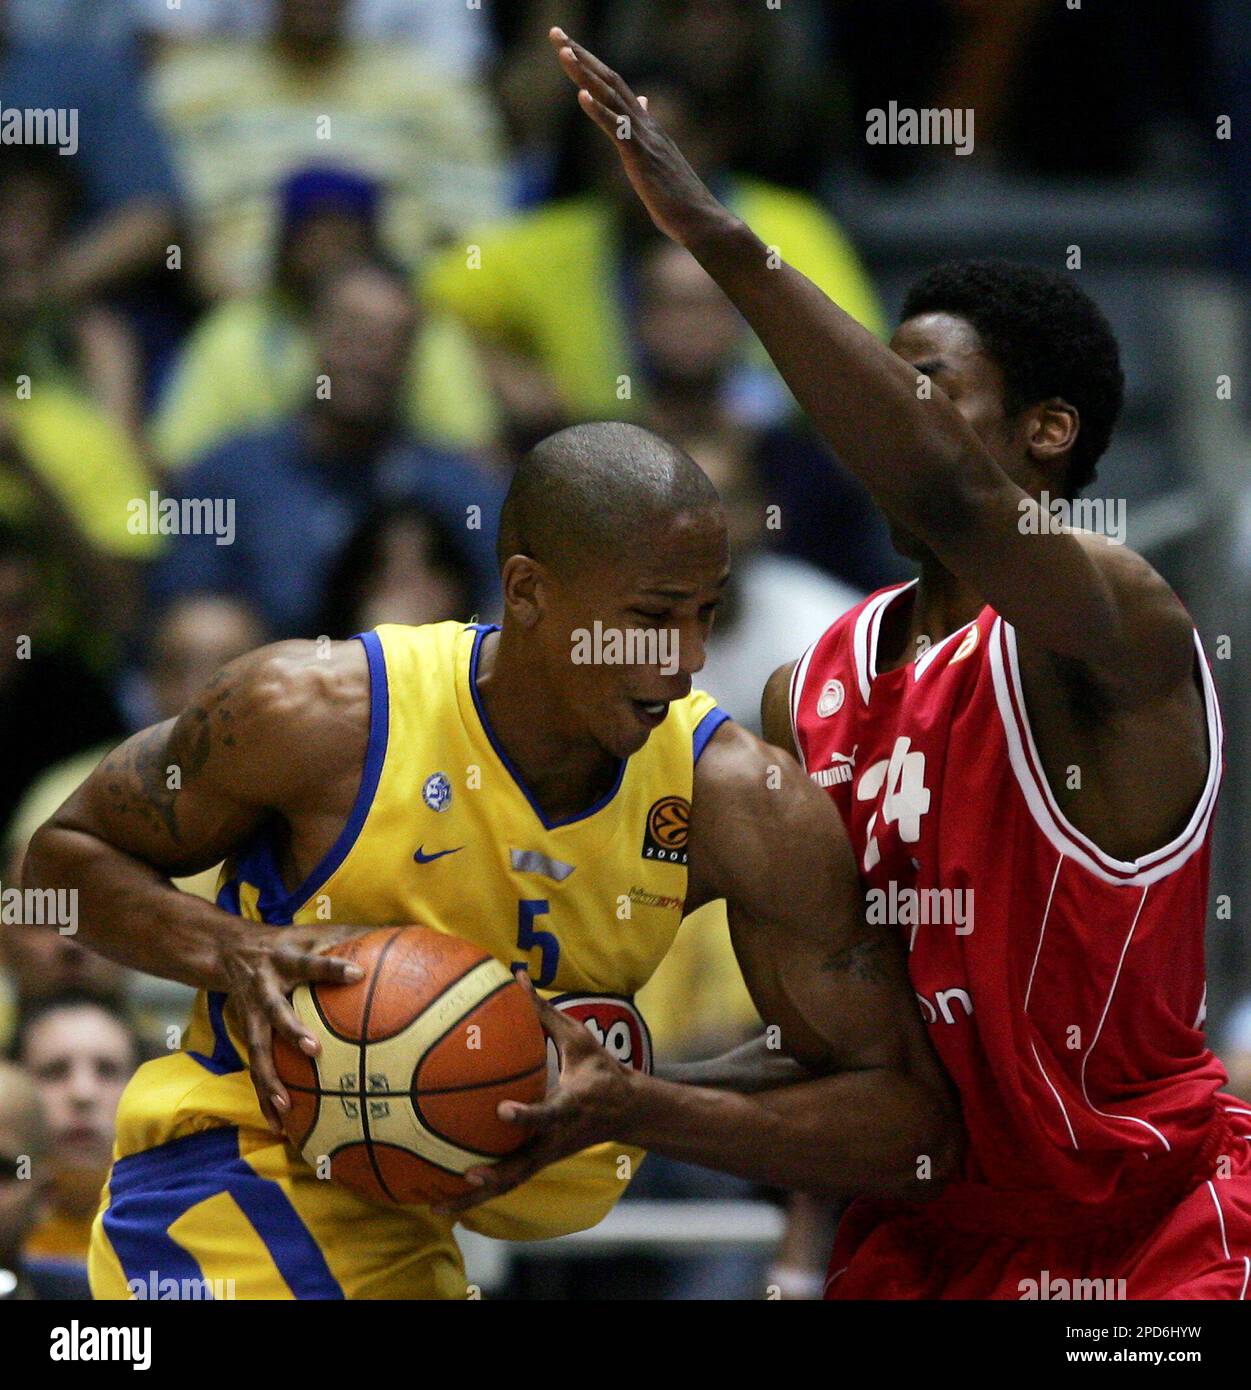 Maccabi Tel Avivs American player Maceo Baston, left, goes to the basket as Olympiacos Quincy Lewis of the USA tries to block him during their Euroleague Quarterfinal Playoff basketball match in Tel